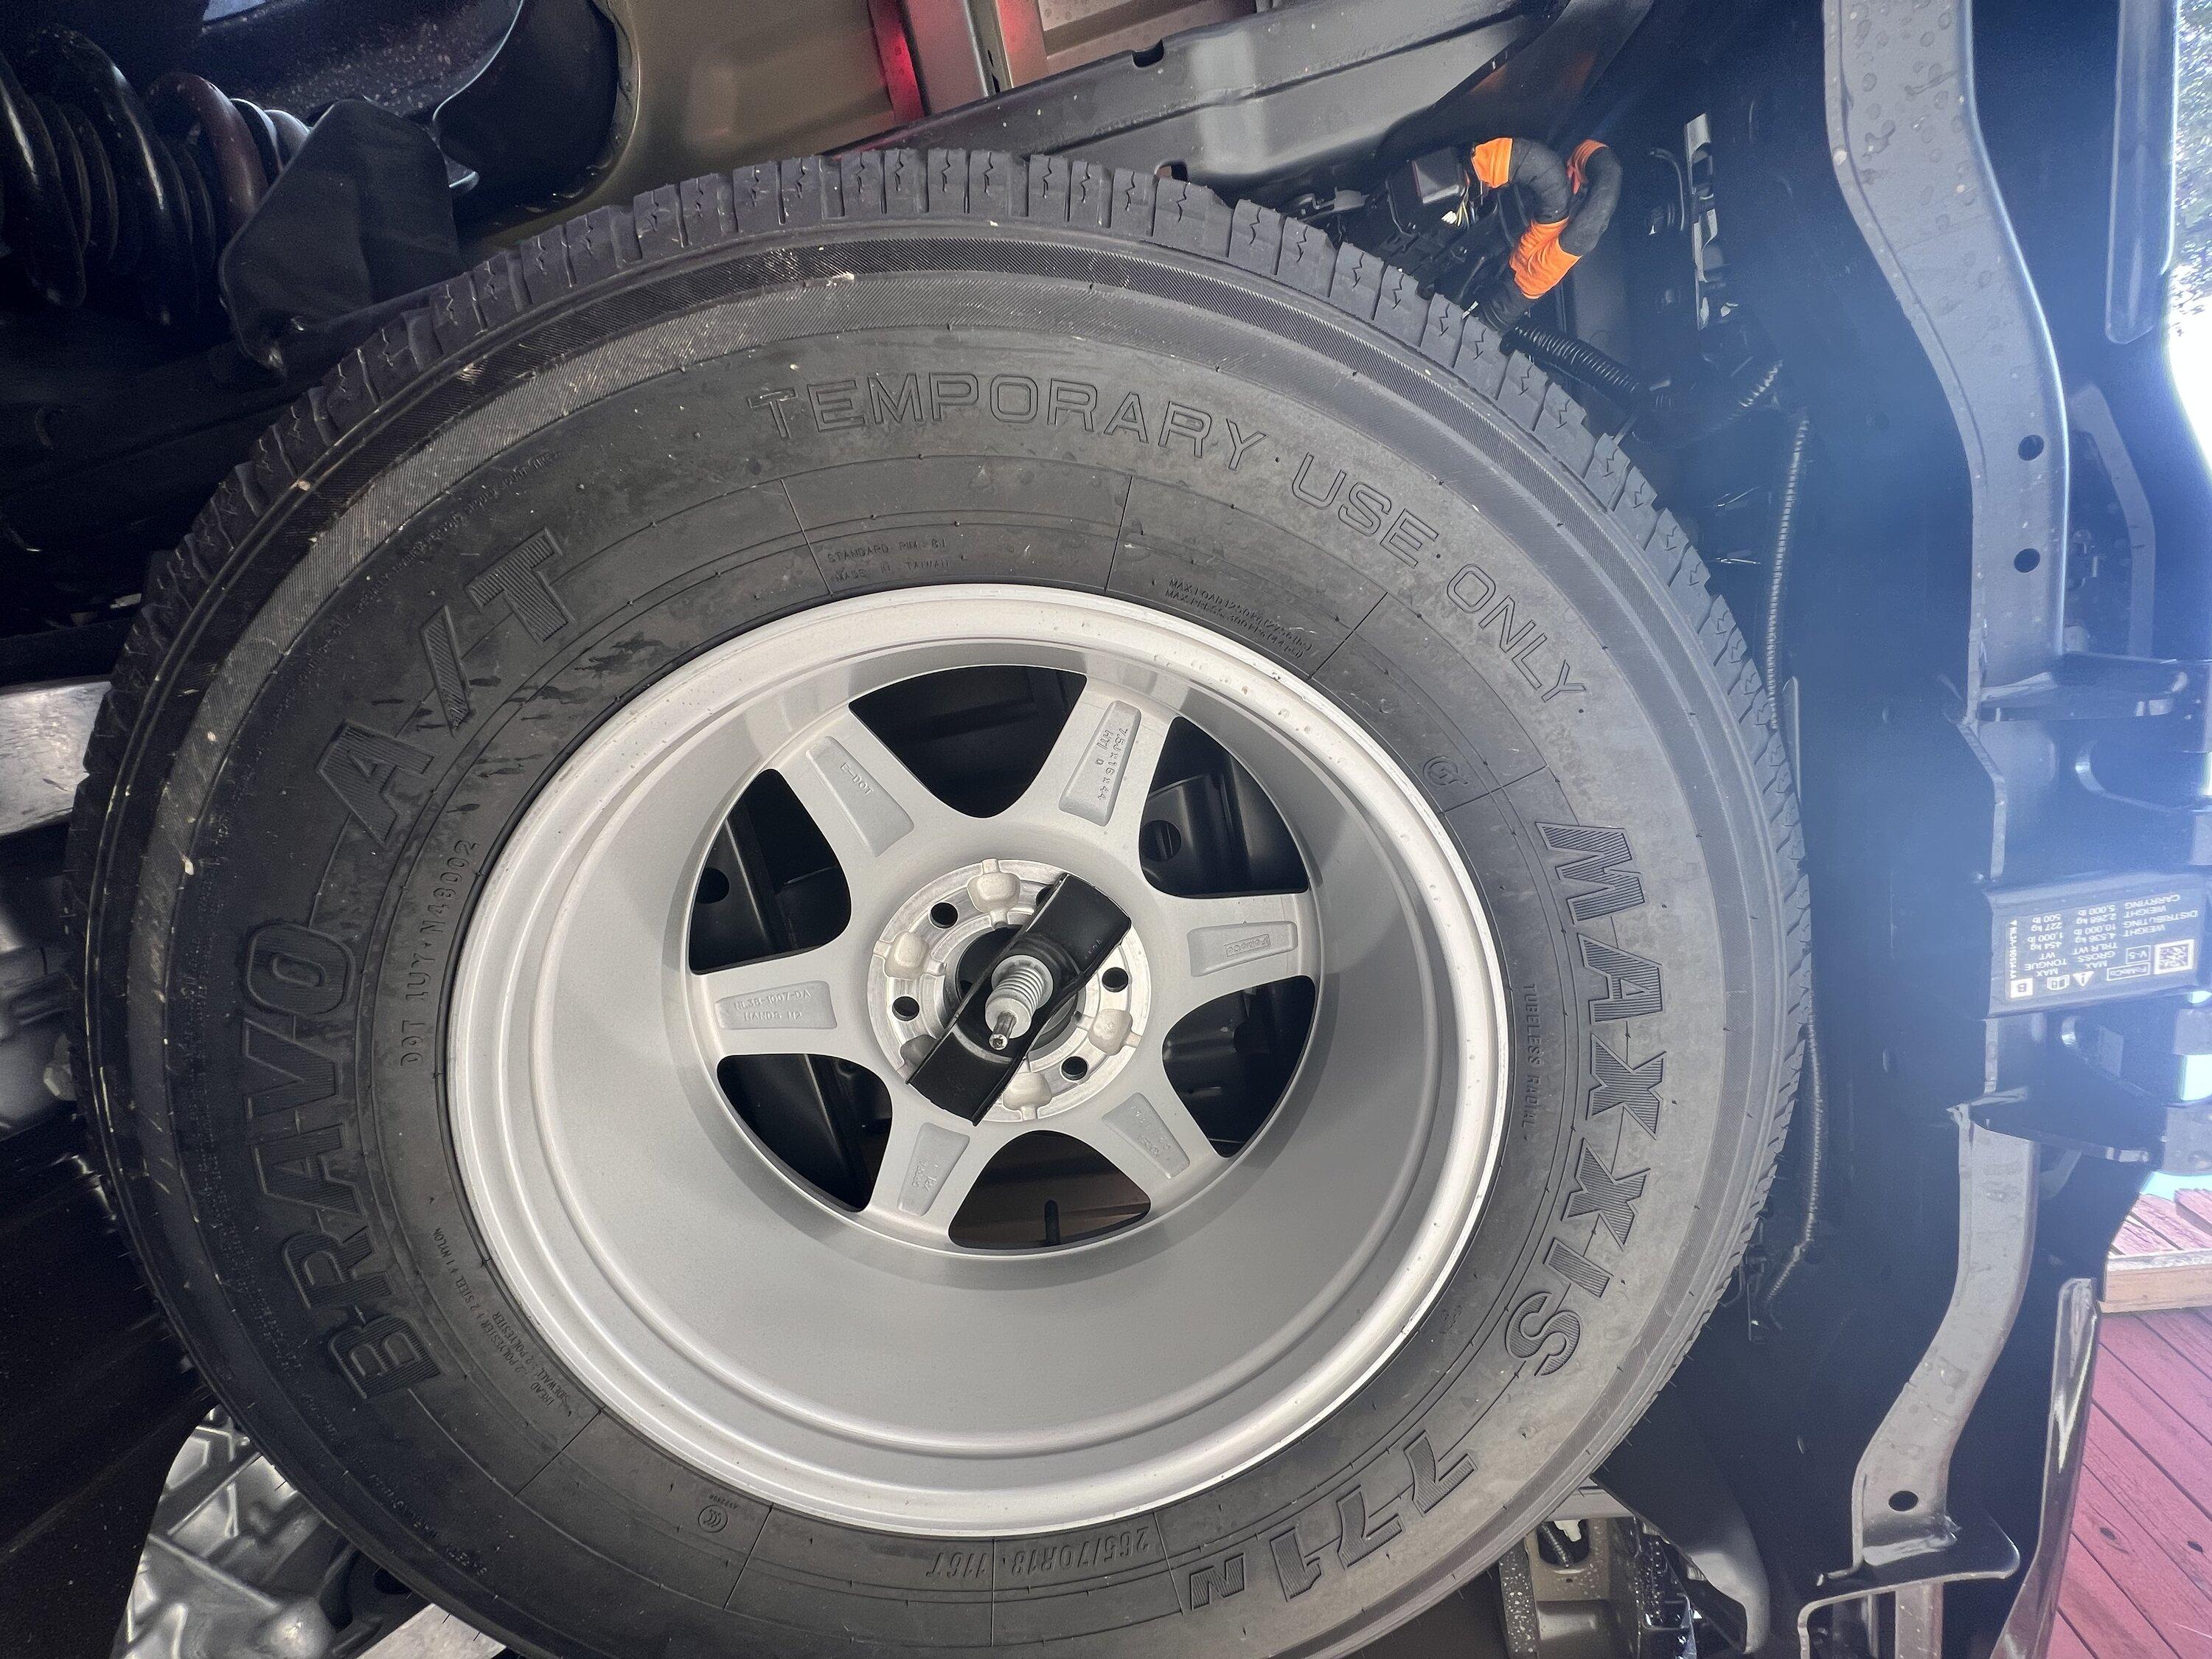 Ford F-150 Lightning Can full size tire be stored under the truck in place of the factory spare tire? E42F1789-262B-44C8-8DAC-8367274C290F